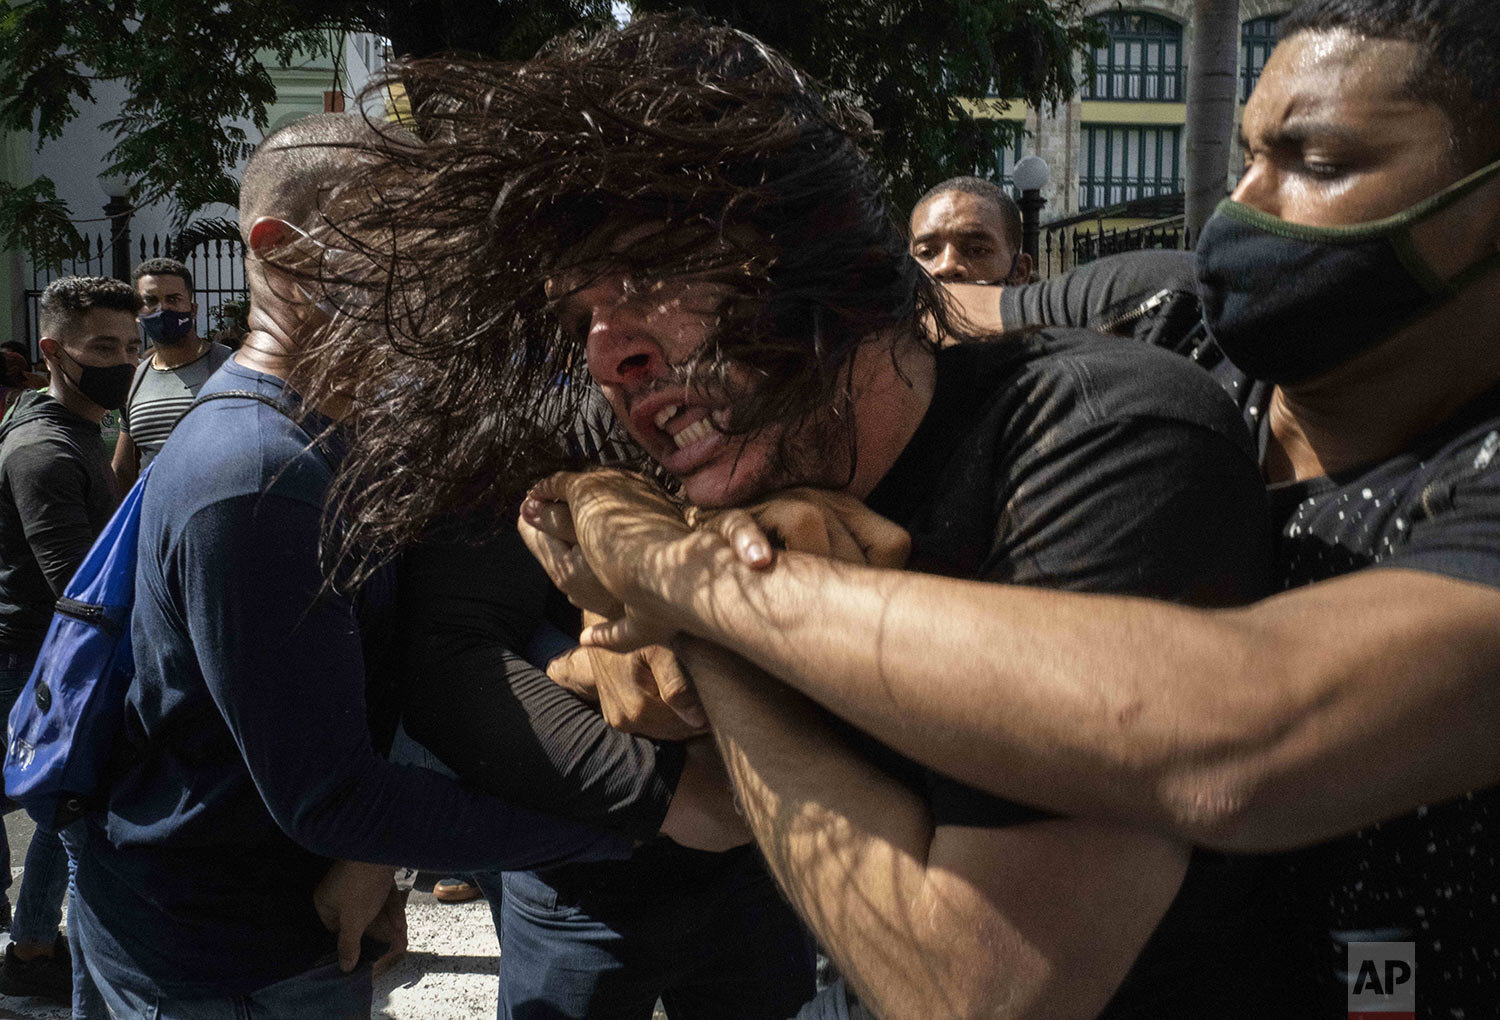  Plainclothes police detain an anti-government protester during a demonstration over high prices, food shortages and power outages, while some people also called for a change in the government, in Havana, Cuba, Sunday, July 11, 2021. Cuban President 